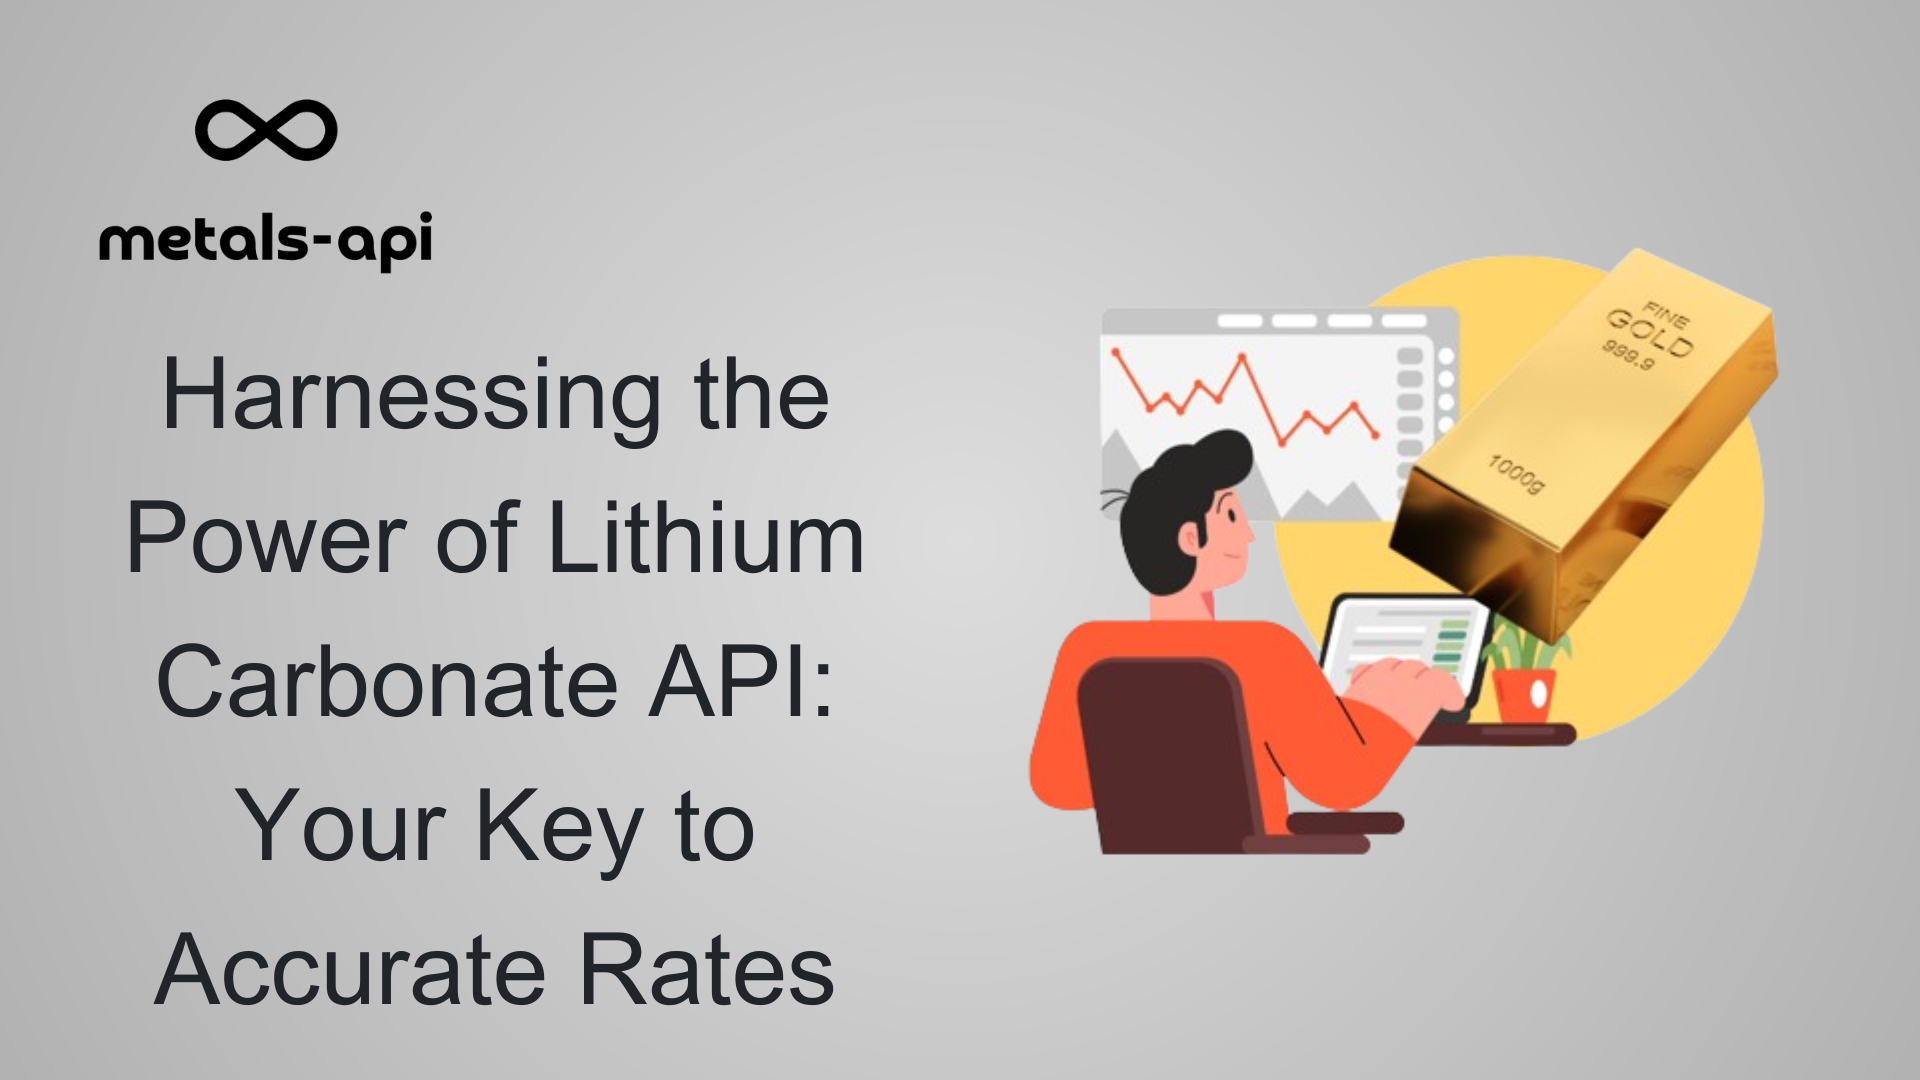 Harnessing the Power of Lithium Carbonate API: Your Key to Accurate Rates